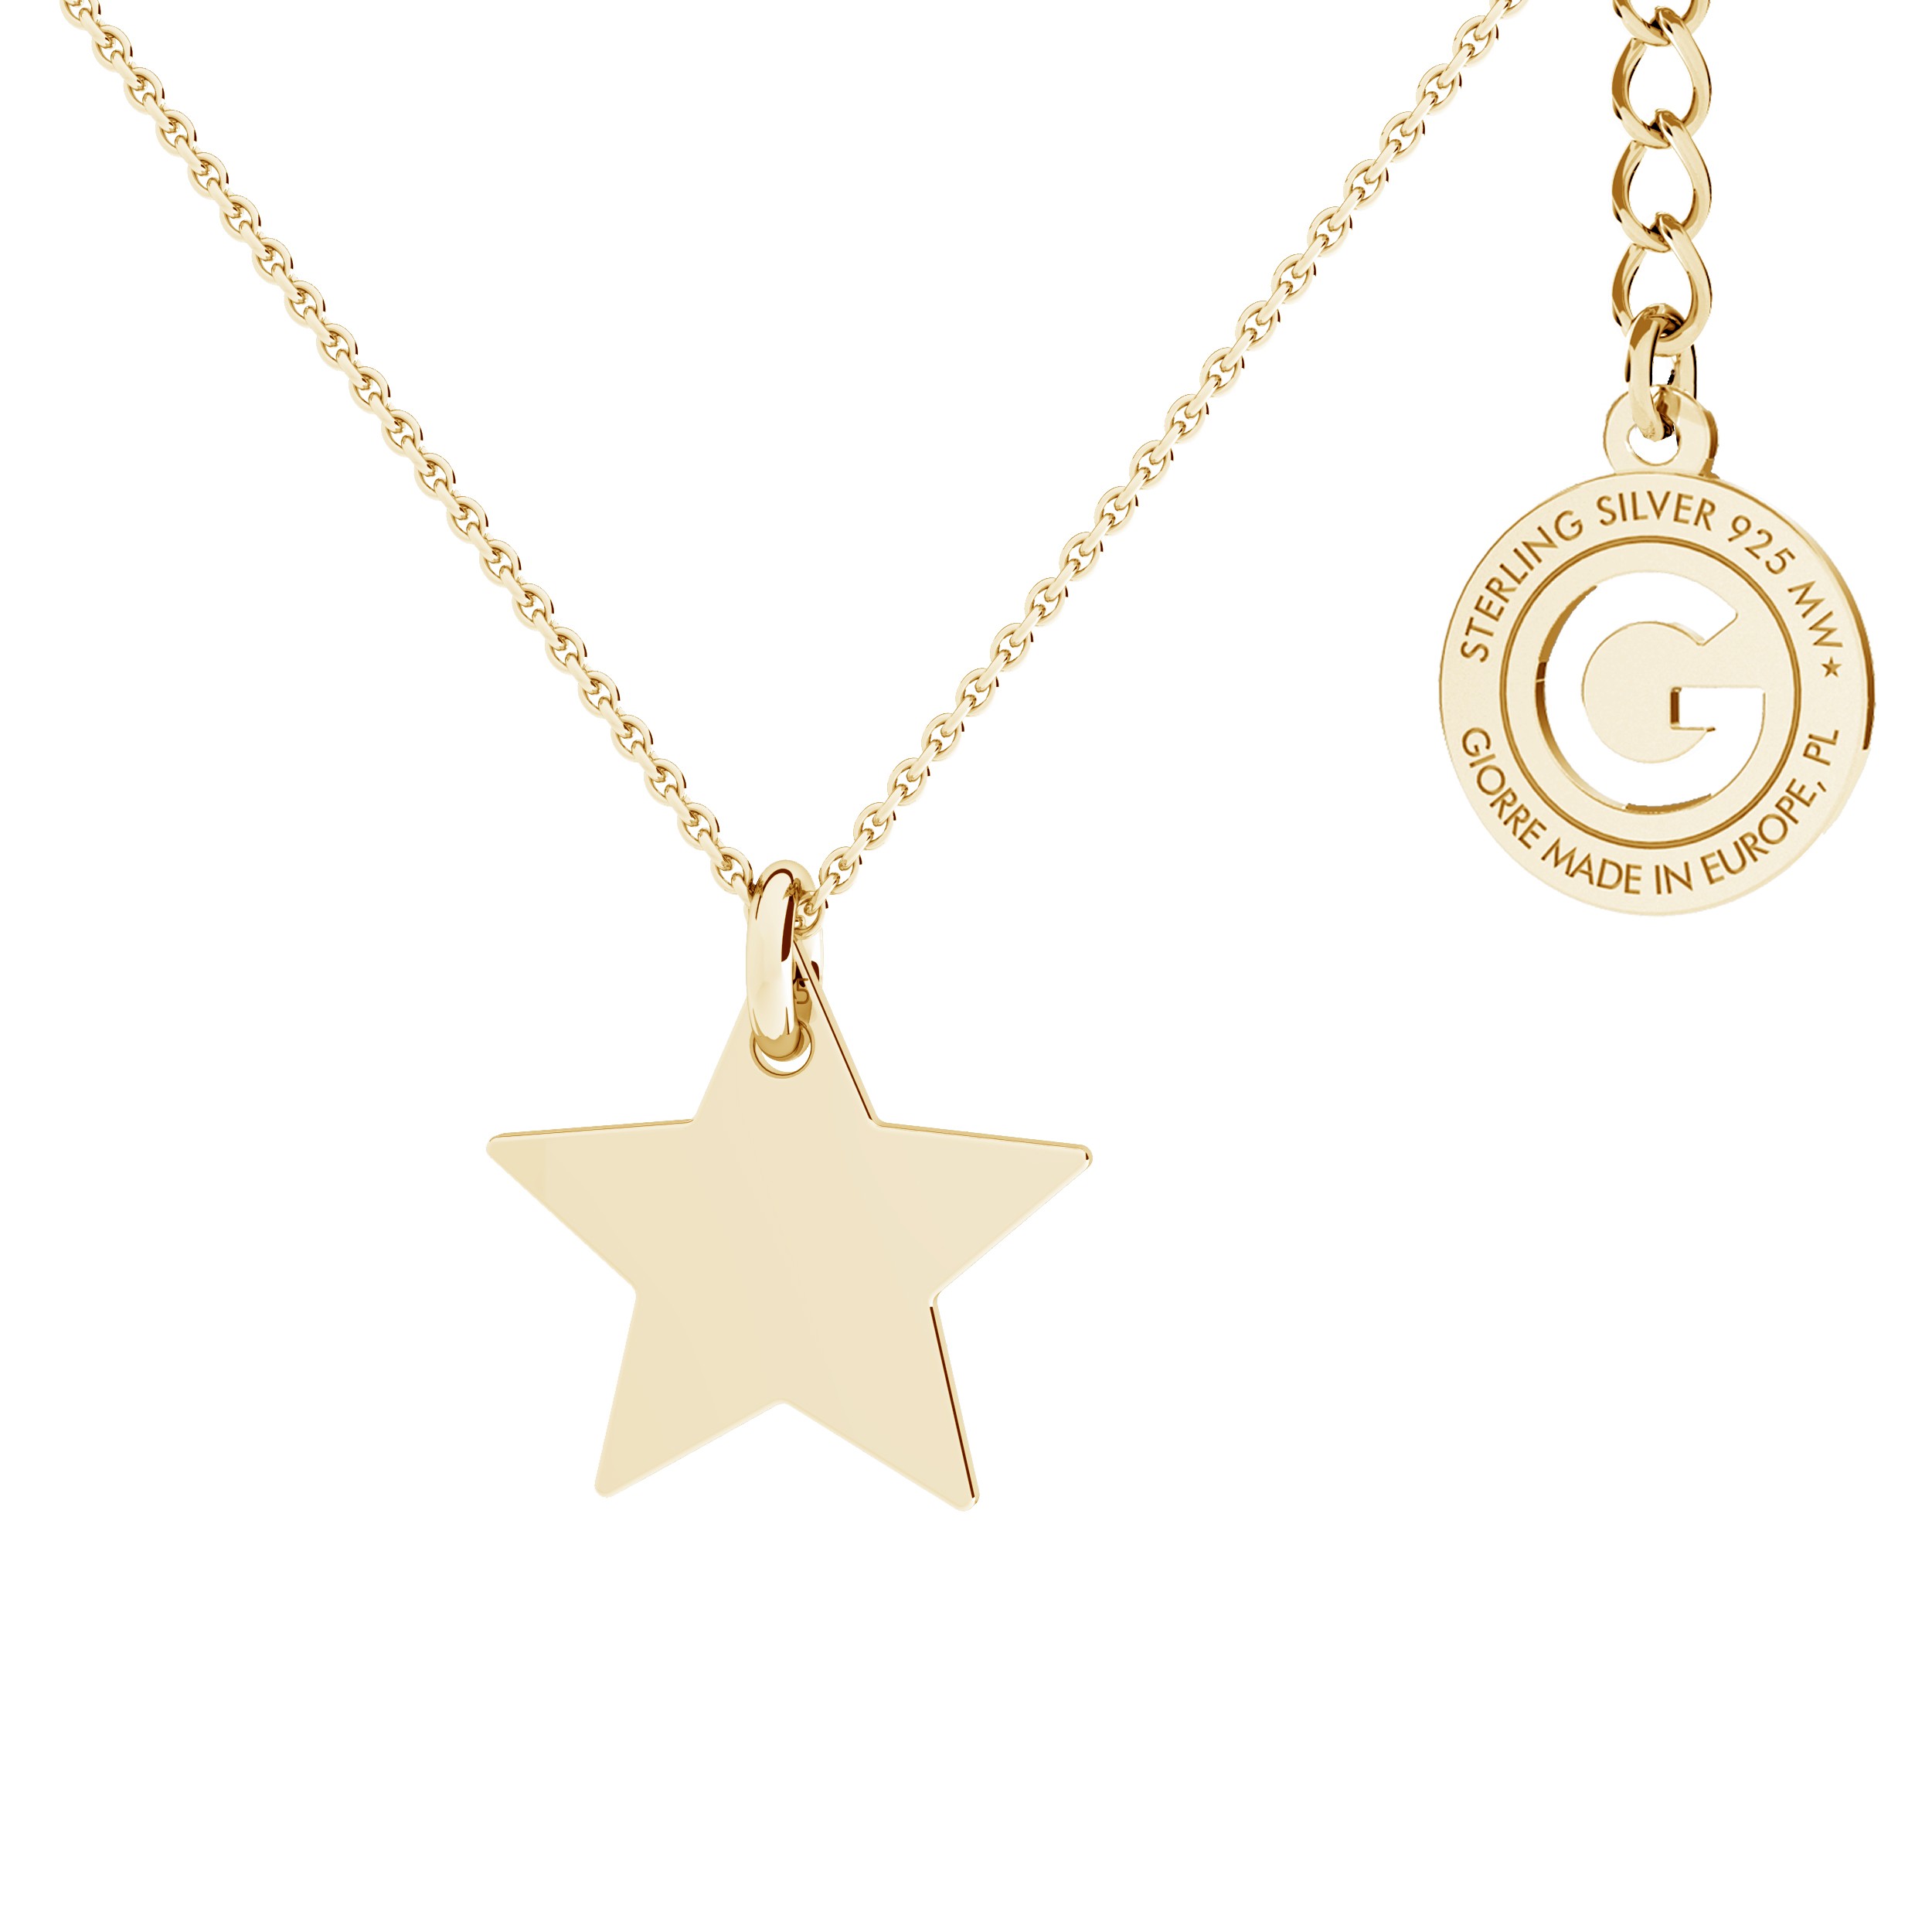 Silver star necklace, silver 925